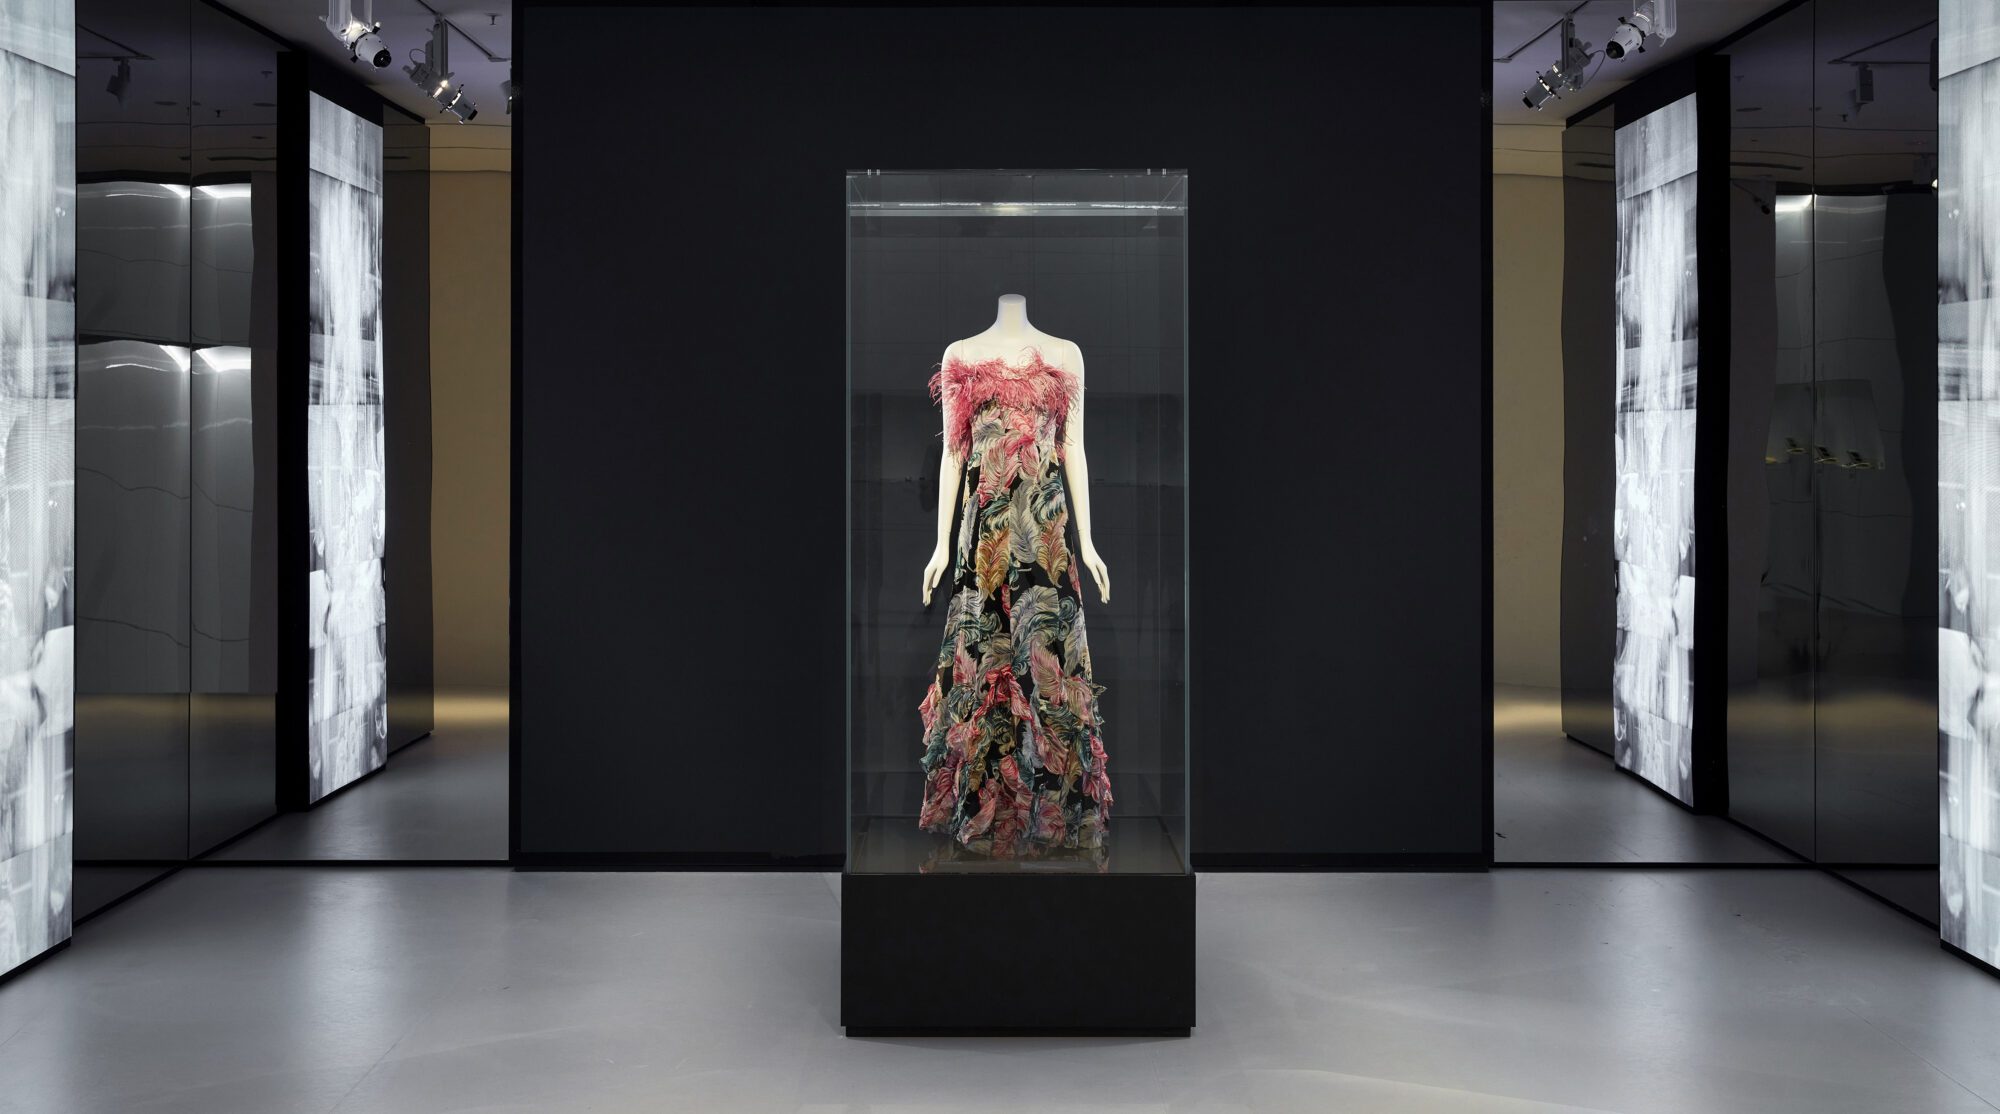 Installation view of
Gabrielle Chanel. Fashion Manifesto from 4 December 2021 to 25 April 2022 at NGV International, Melbourne. Photo: Sean Fennessy